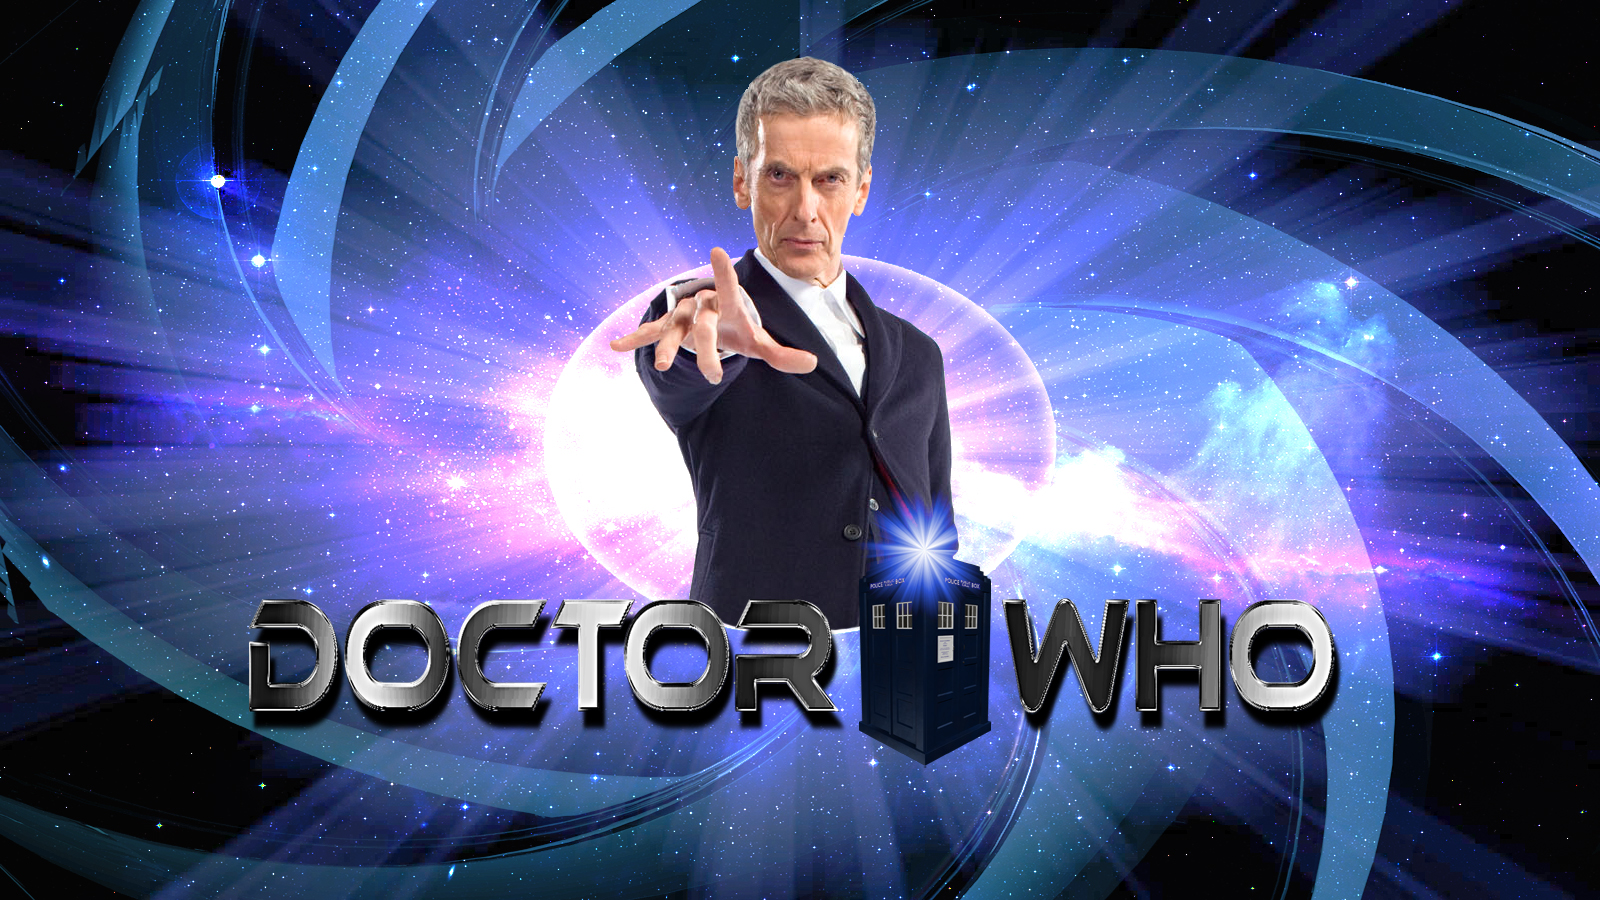 The 12th Doctor Wp By Swfan1977 Customization Wallpaper Photo